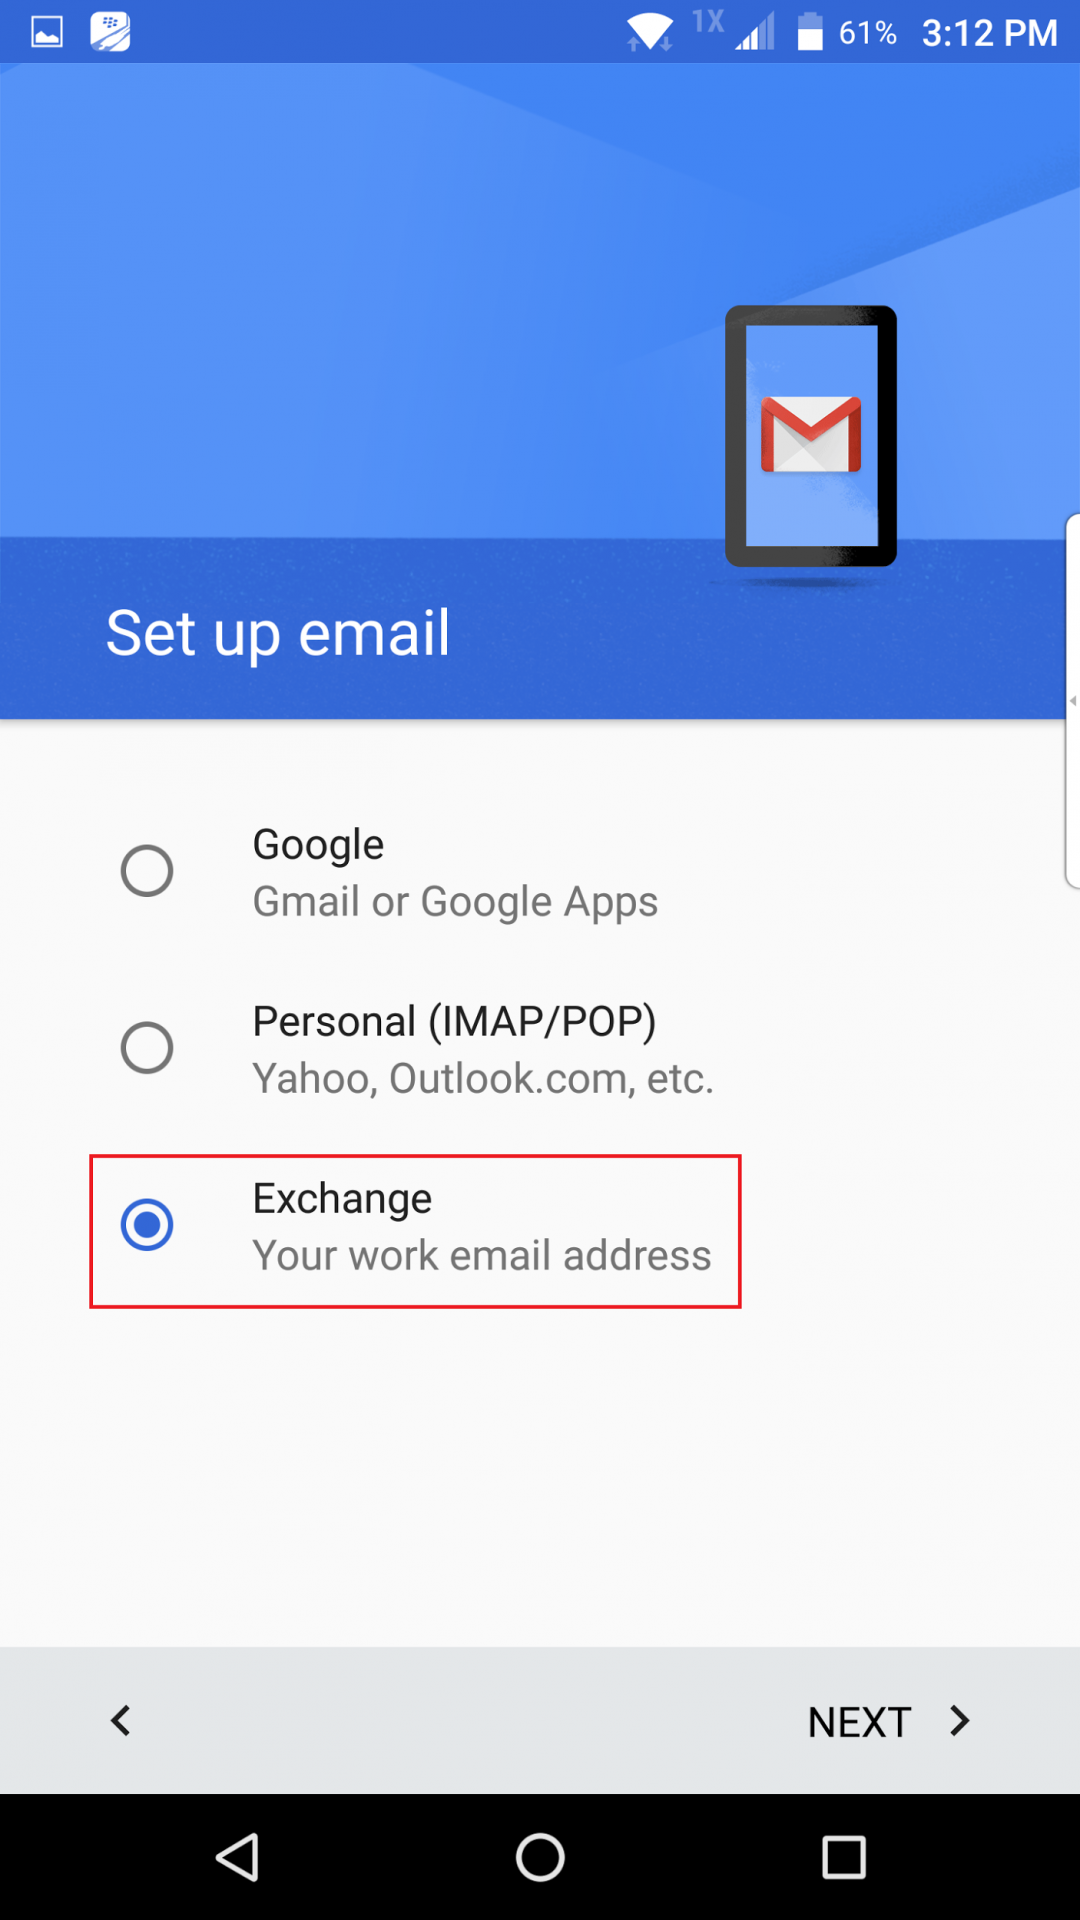 Set up email screen with Exchange option circled